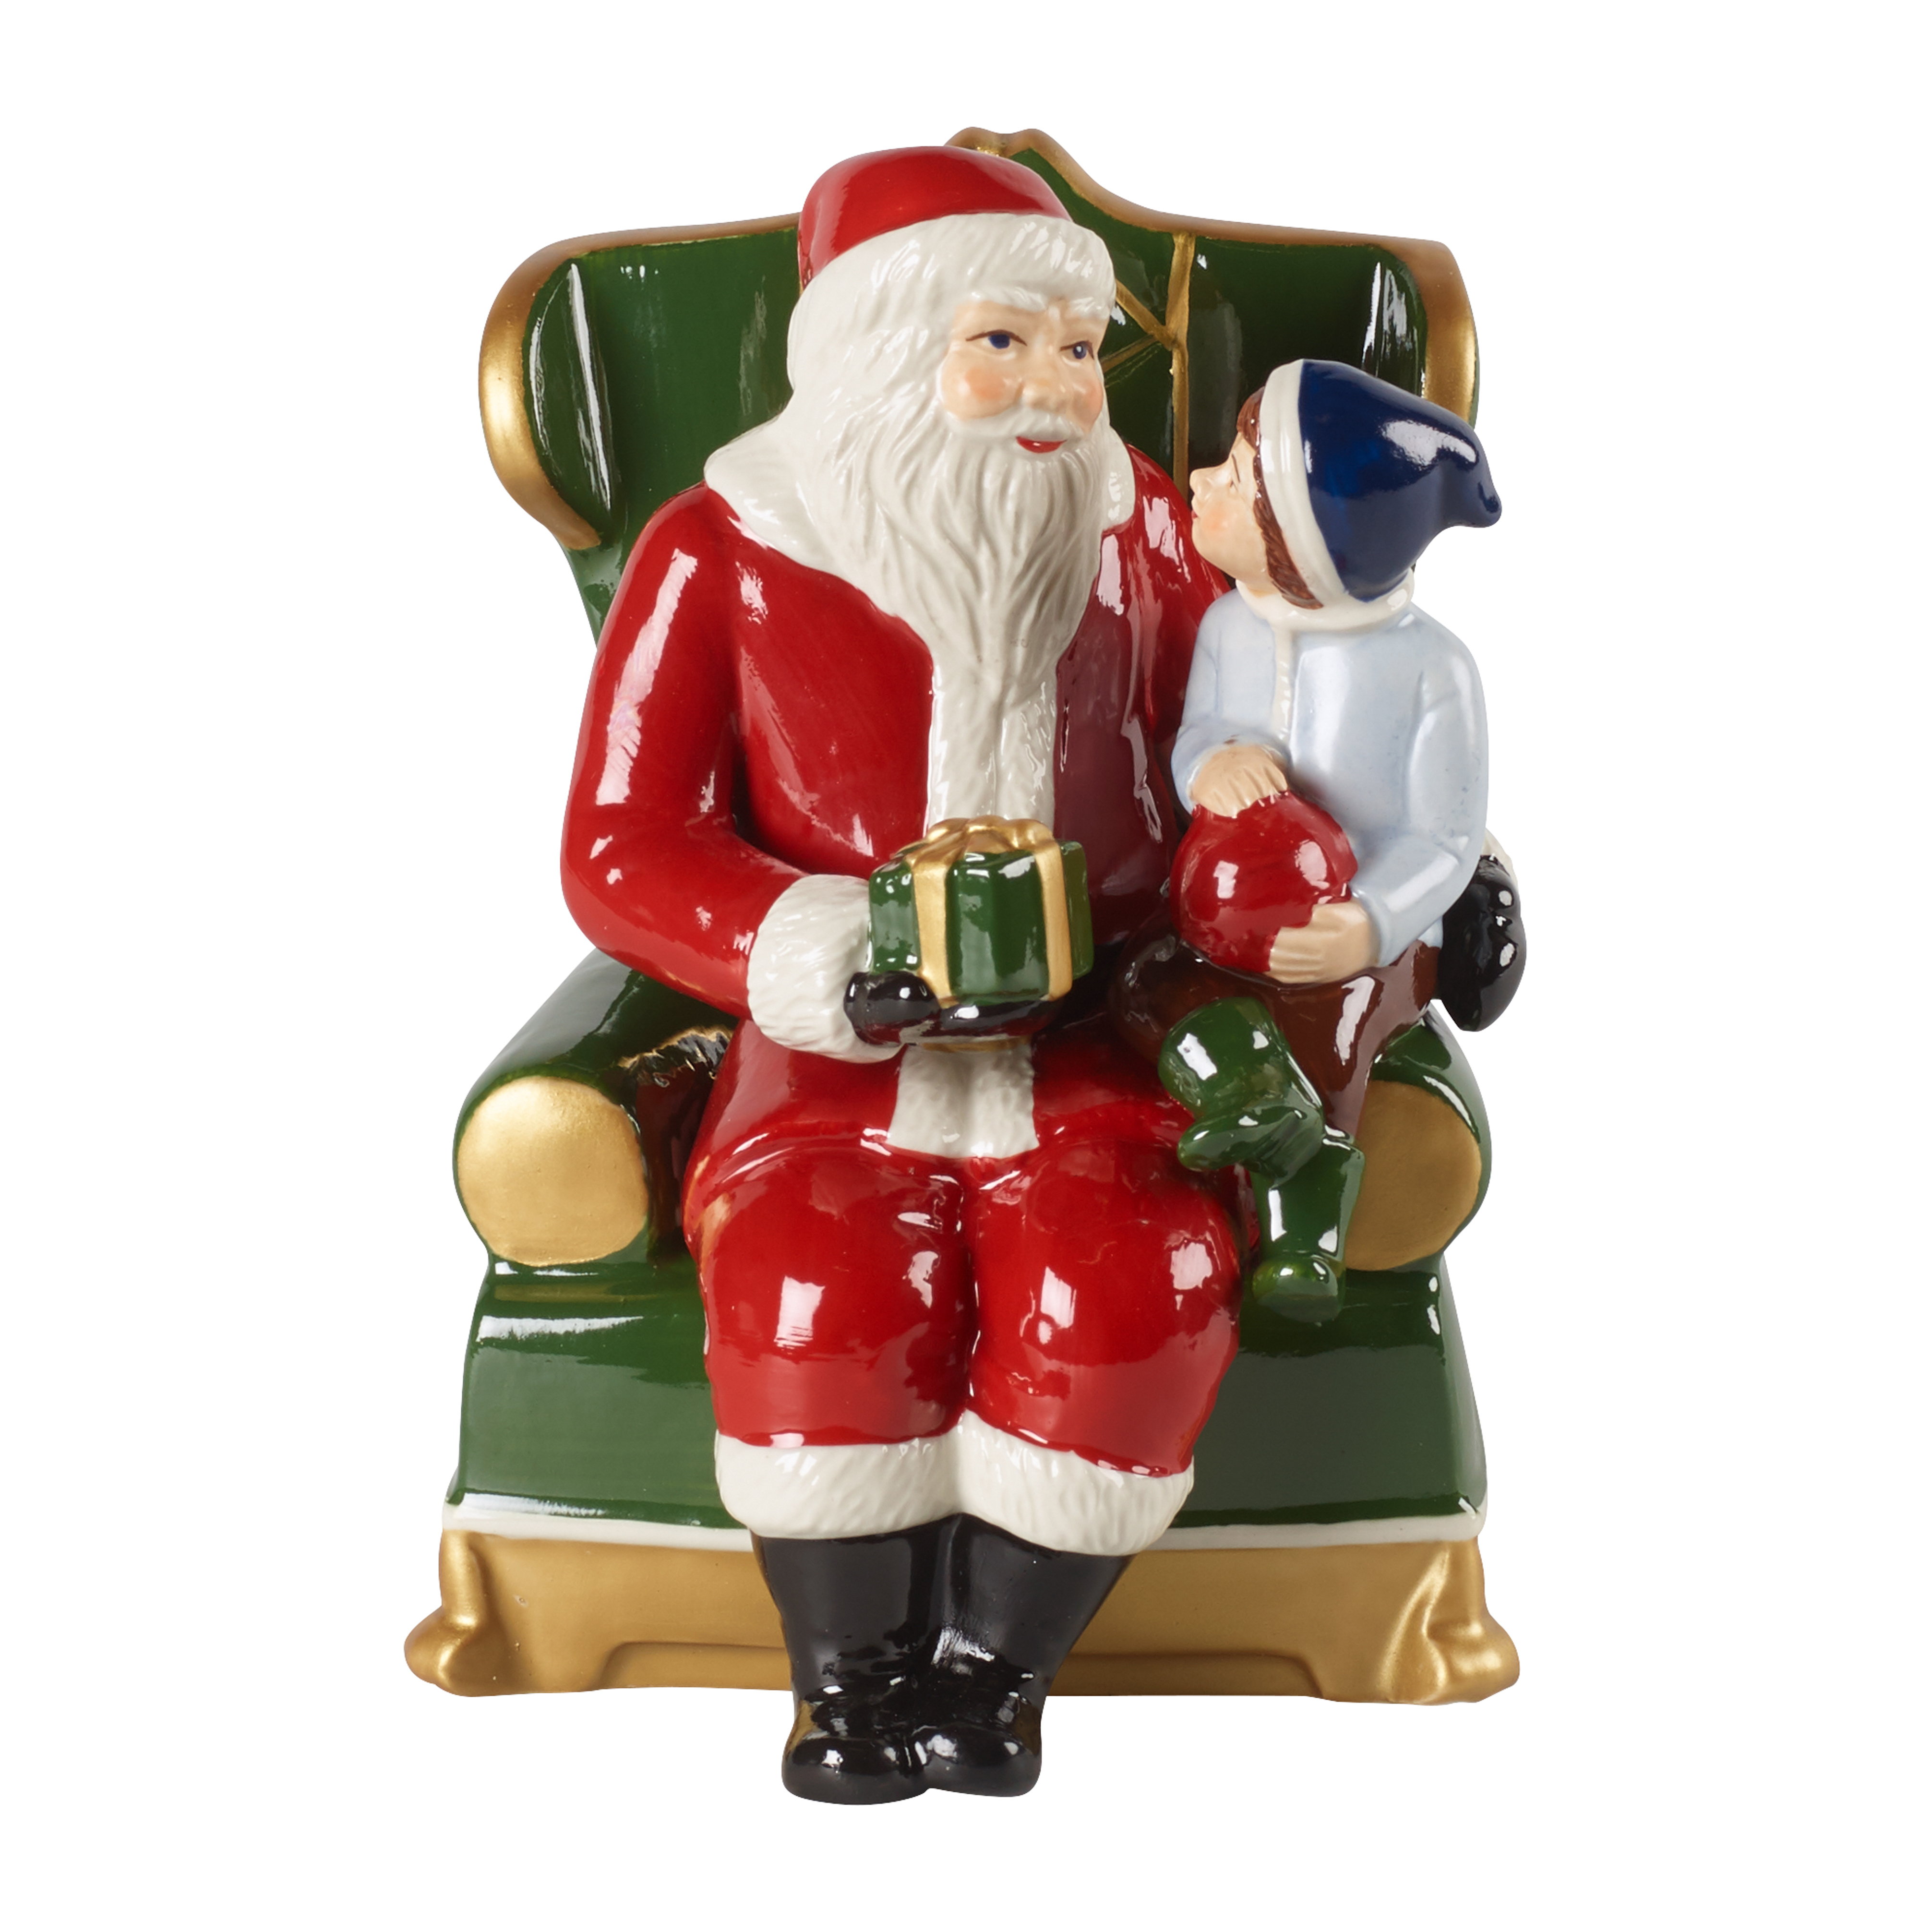 Christmas Toys Santa Claus in arm chair from Villeroy & Boch 